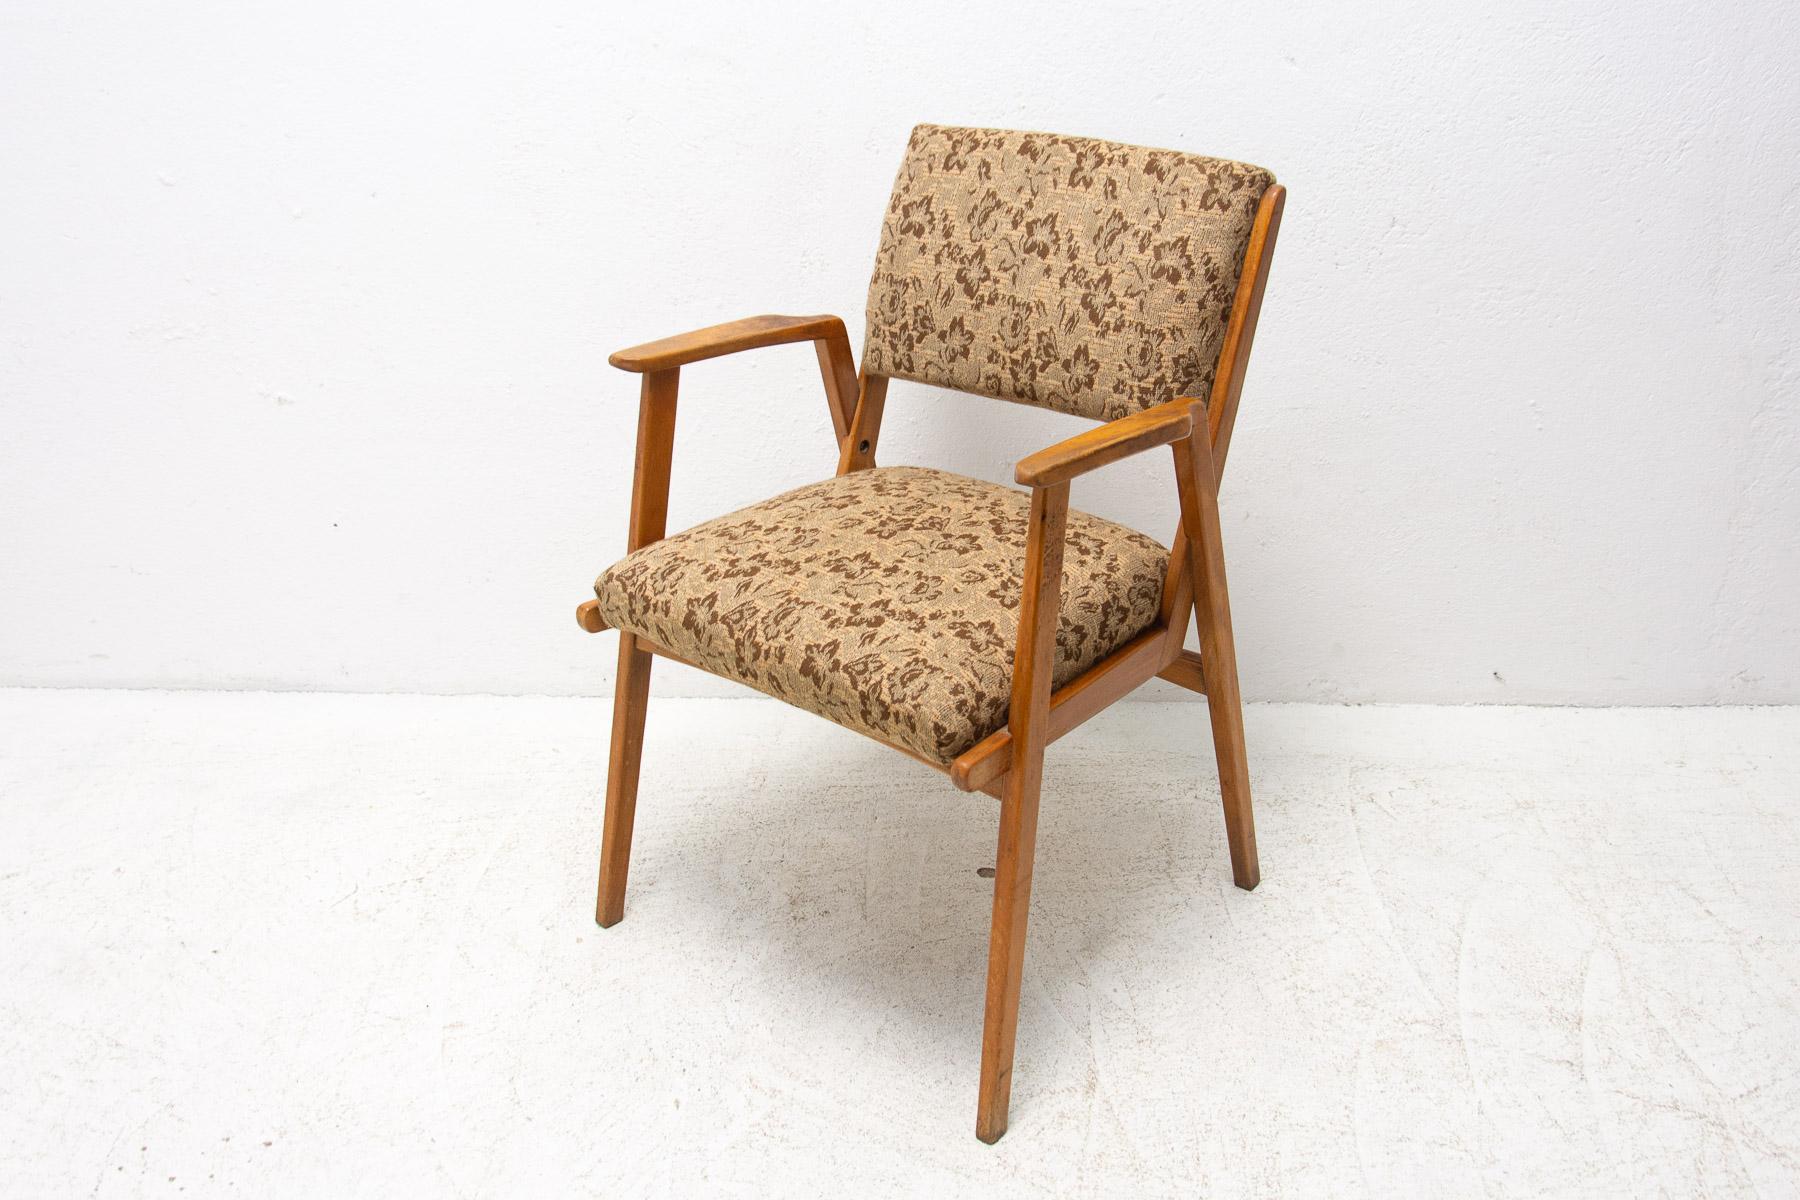 This armchair was made in the 1960´s. It can be used as an office chair or lounge chair. Typical for Czechoslovak design following the enormous success of the Czechoslovak Pavilion at the exhibition EXPO 58 in Brussels. Made of beechwood and fabric.